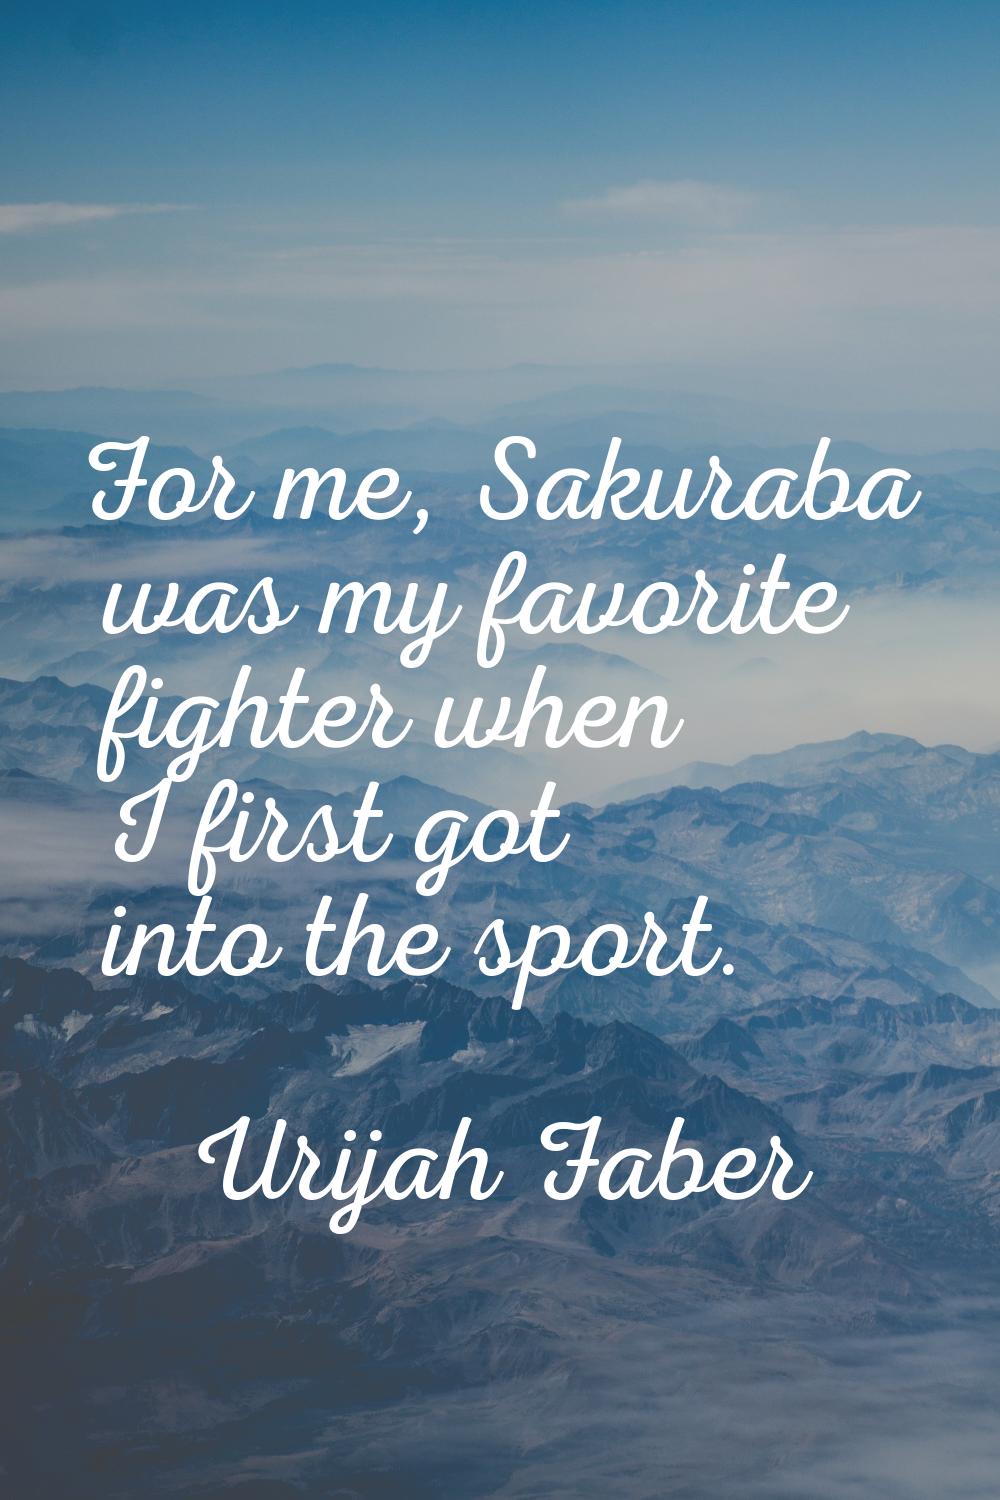 For me, Sakuraba was my favorite fighter when I first got into the sport.